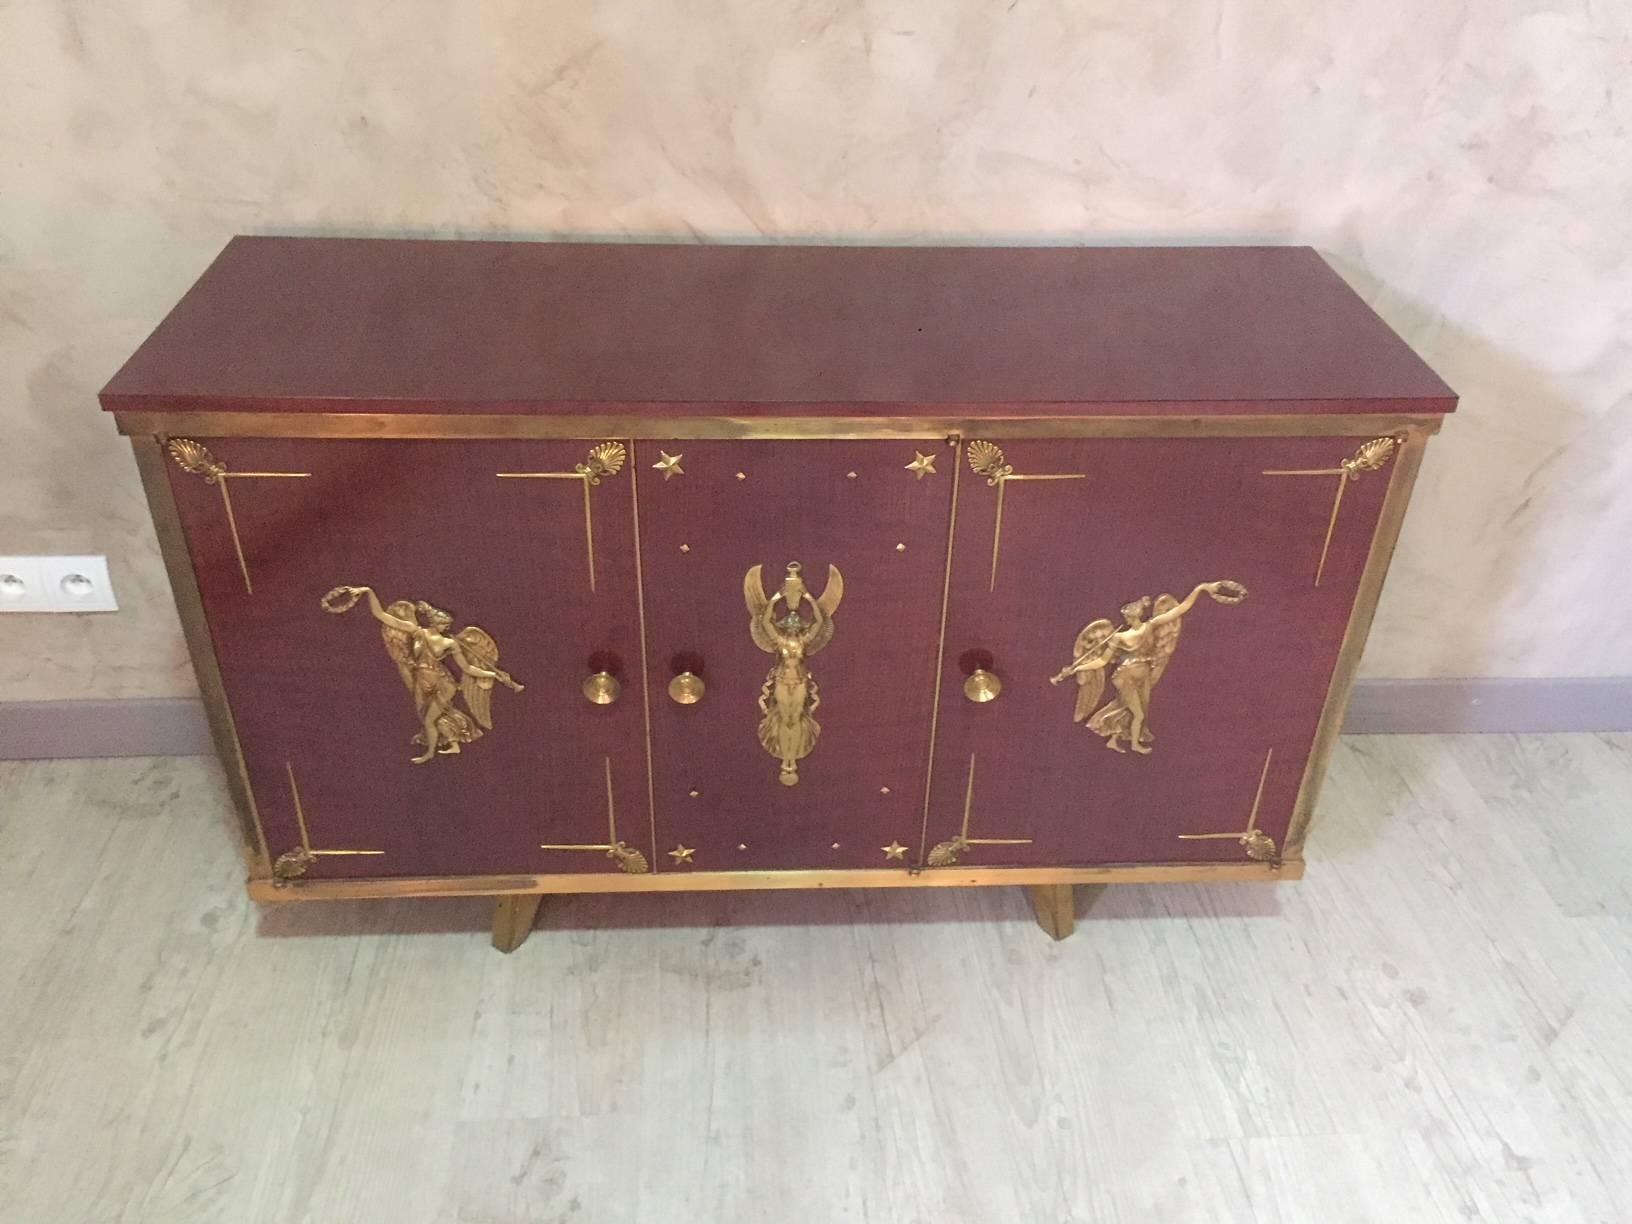 Empire veneered mahogany and gilded brass enfilade, 1950s. Rare model. Three doors.
Removable top. Nice characters brass work. Asymmetrical brass feet.